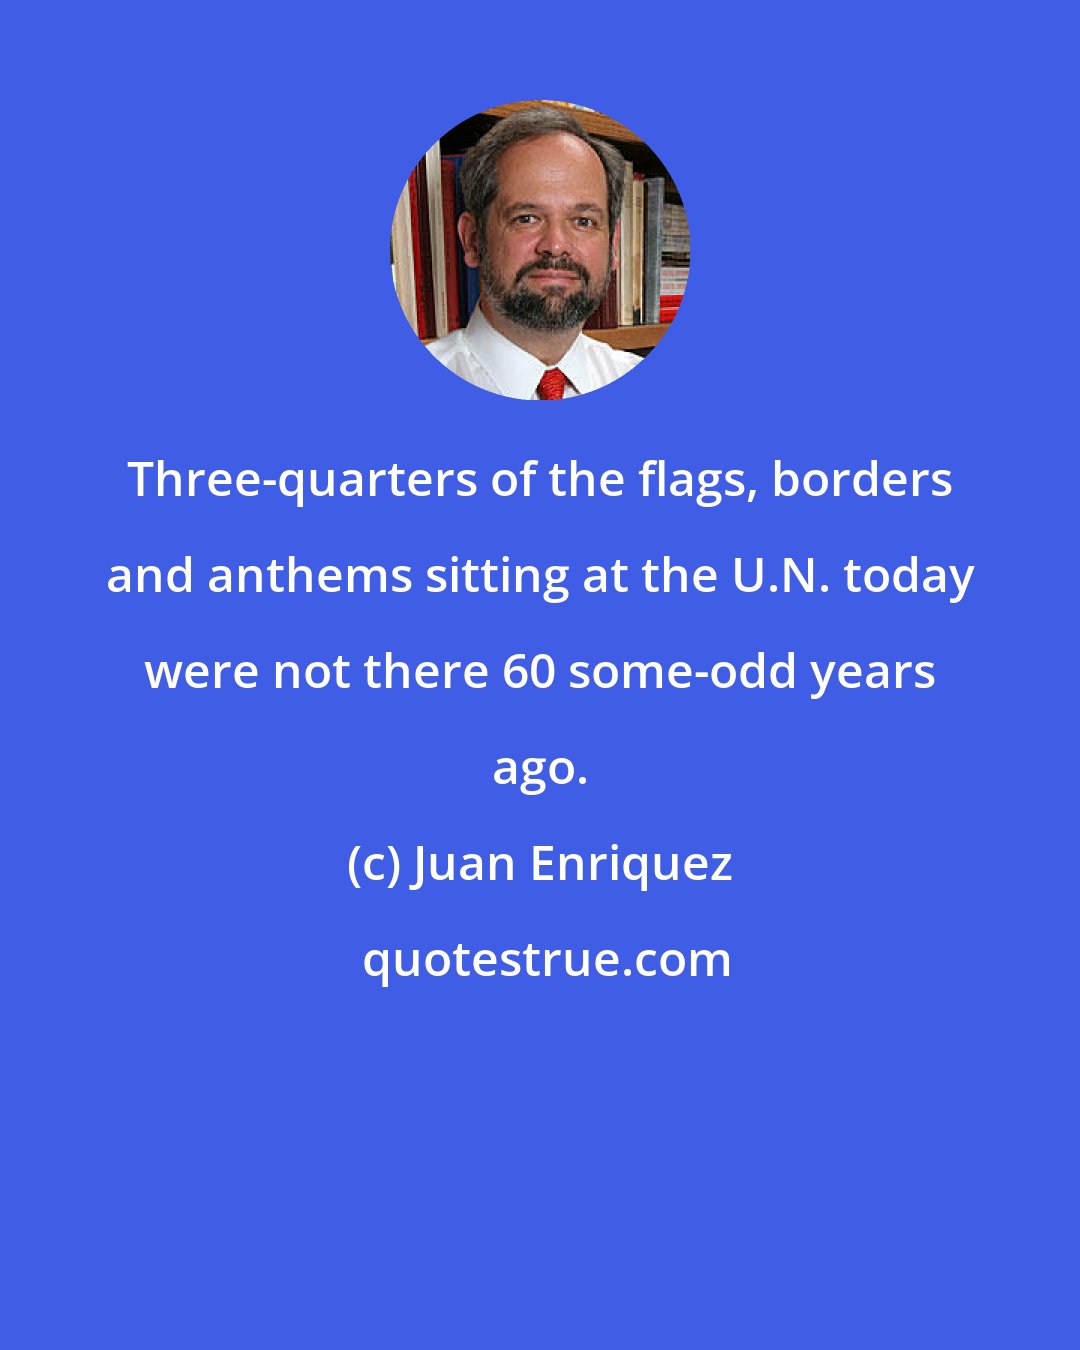 Juan Enriquez: Three-quarters of the flags, borders and anthems sitting at the U.N. today were not there 60 some-odd years ago.